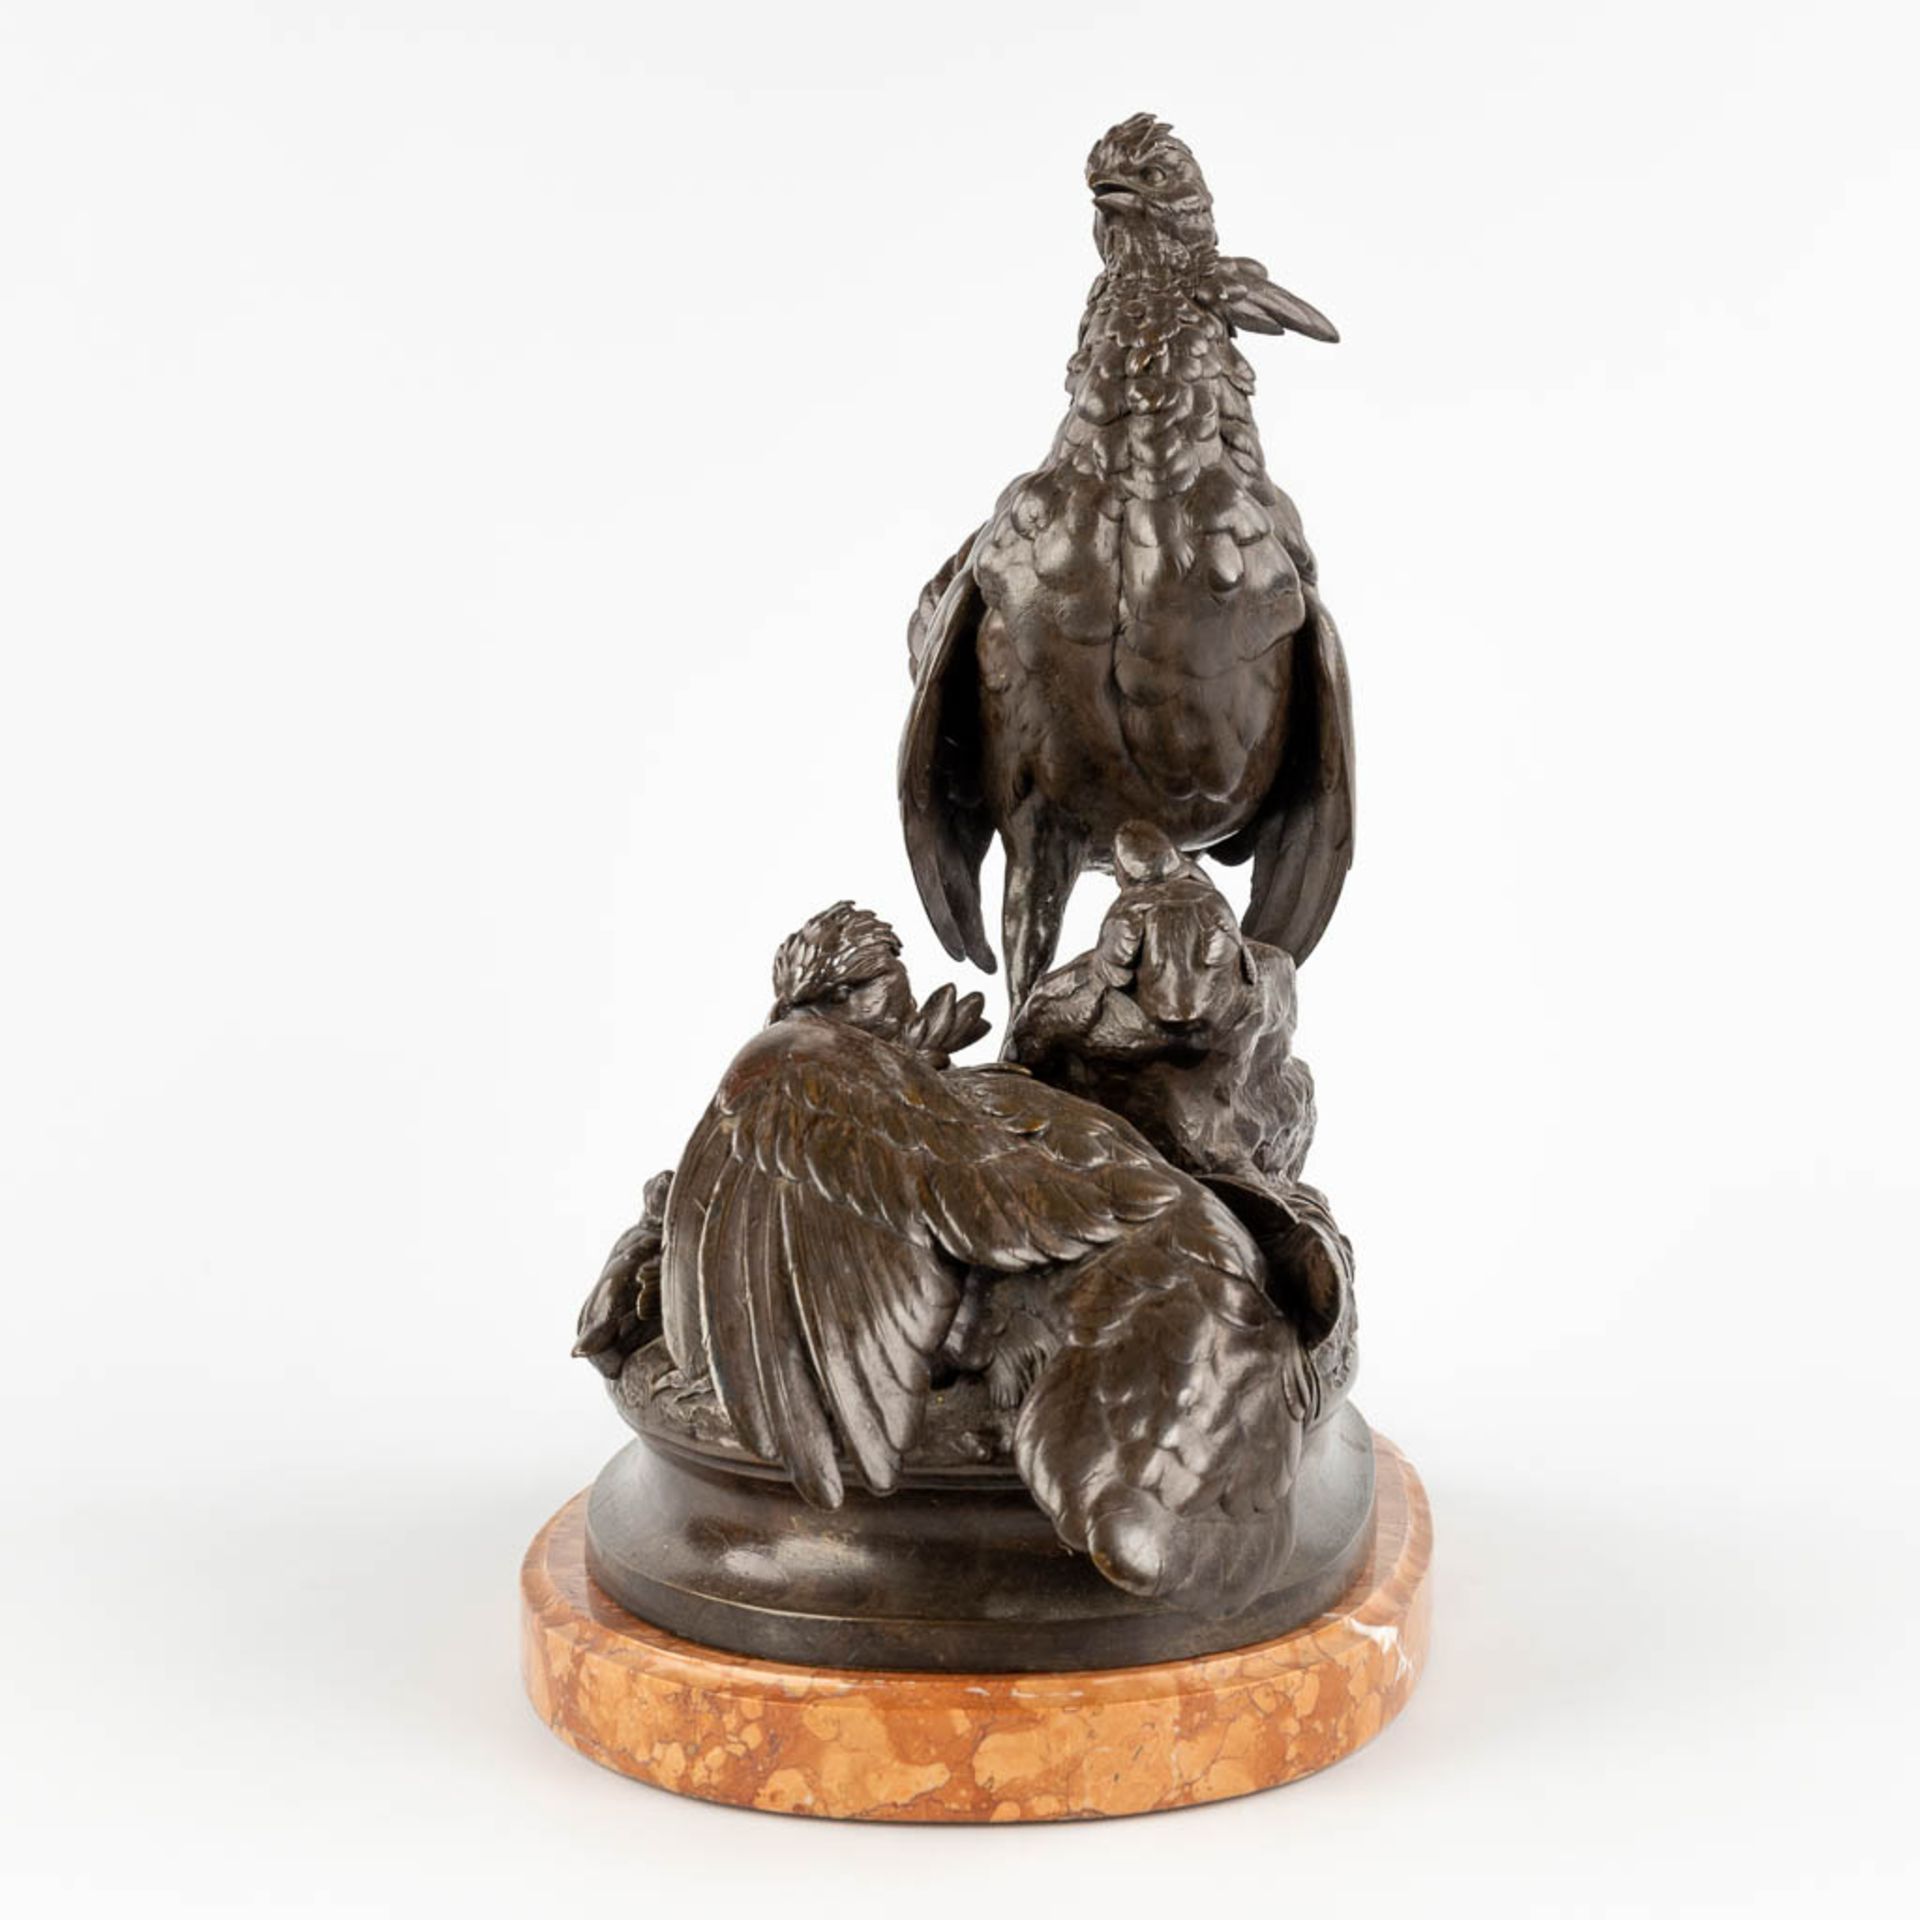 Alphonse ARSON (1822-1895) 'Partridge with chicks' patinated bronze. 1877. (D:22 x W:40 x H:41 cm) - Image 6 of 14